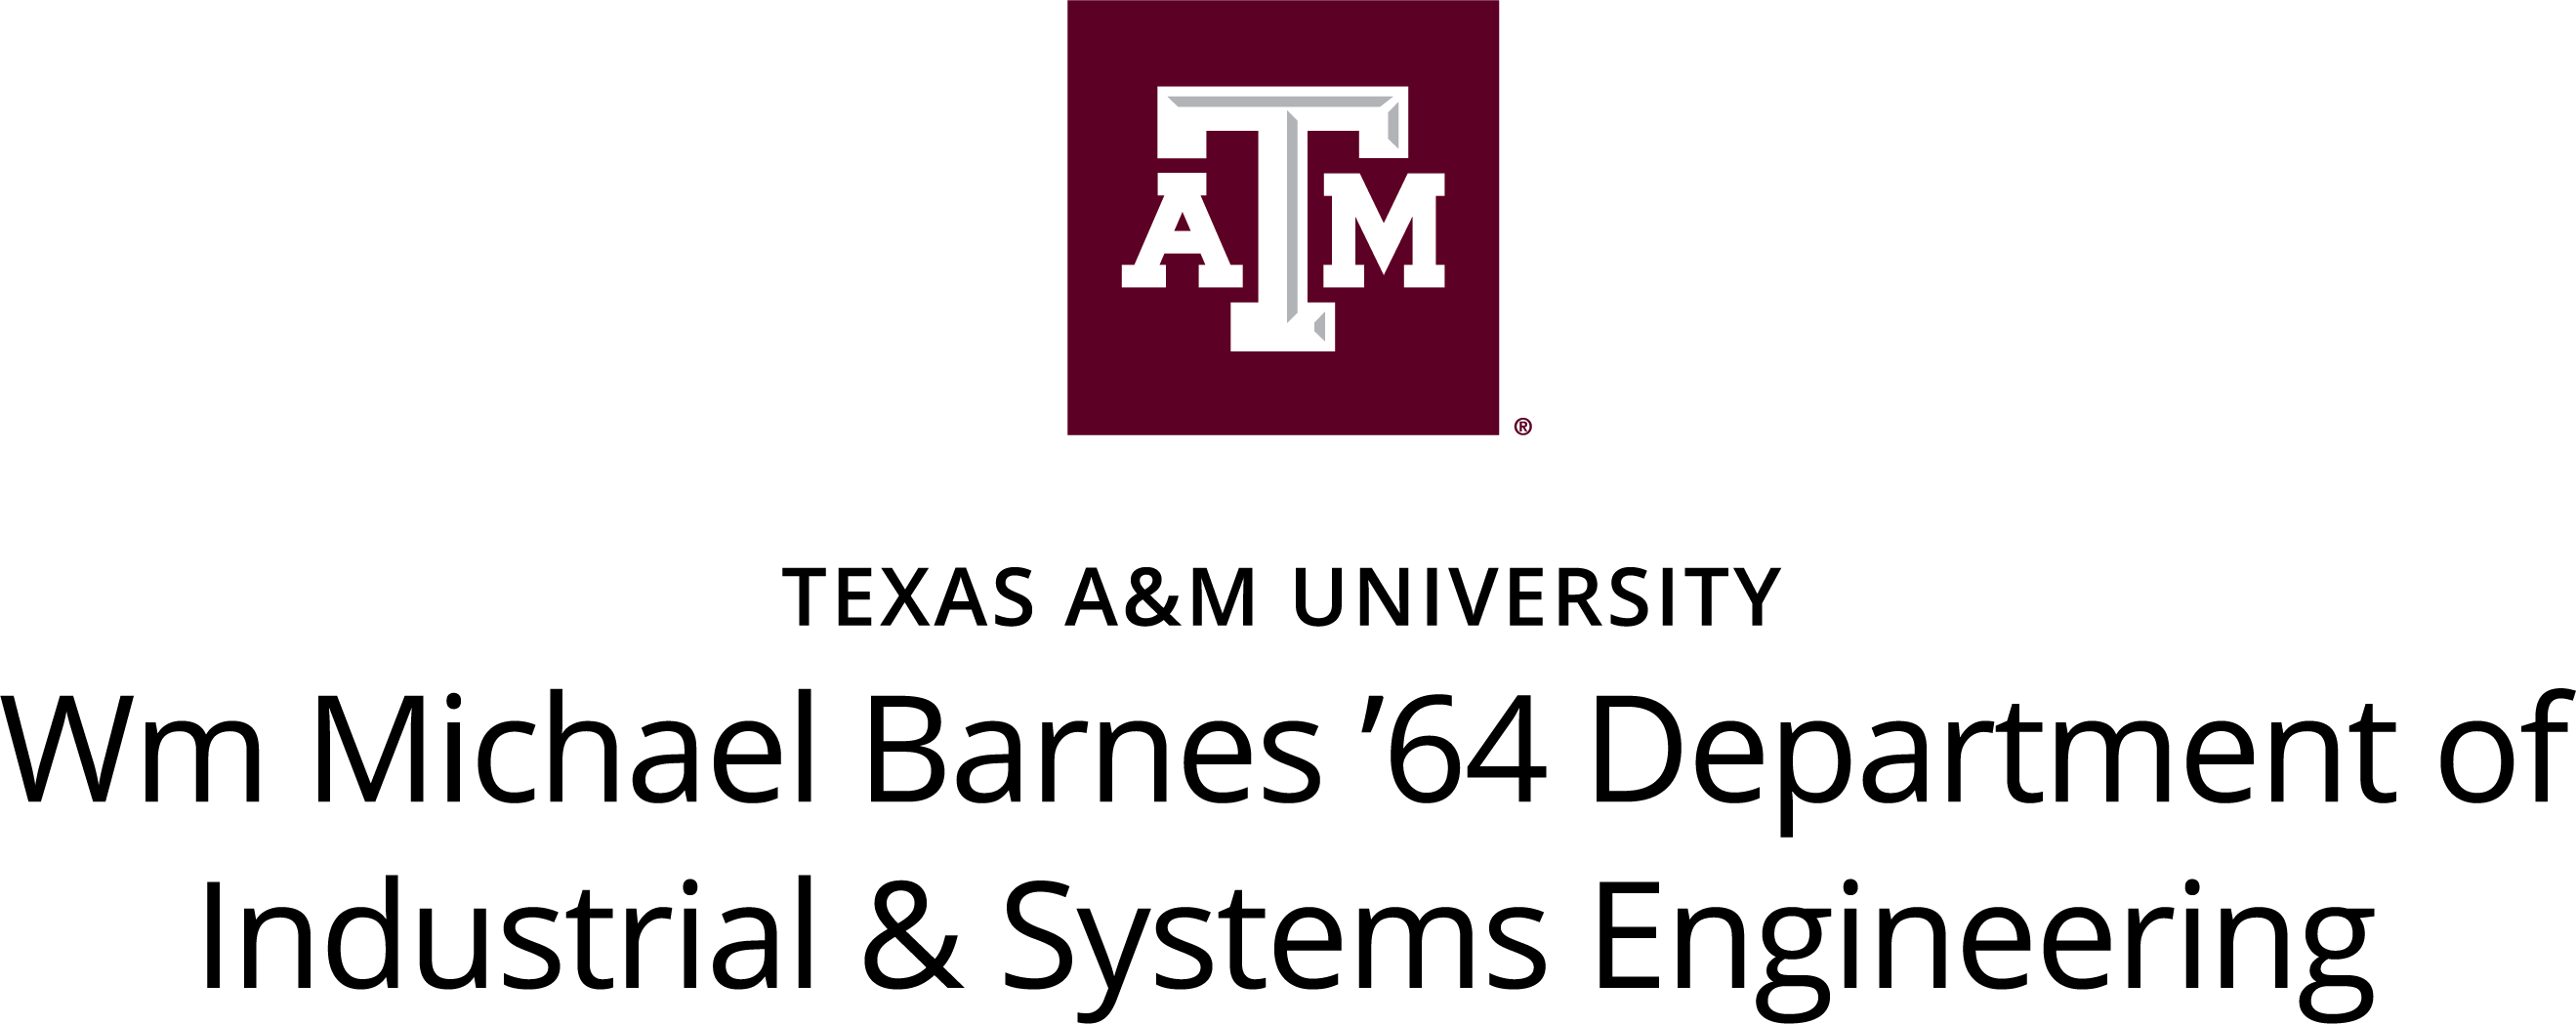 Texas A&M University Industrial and Systems Engineering